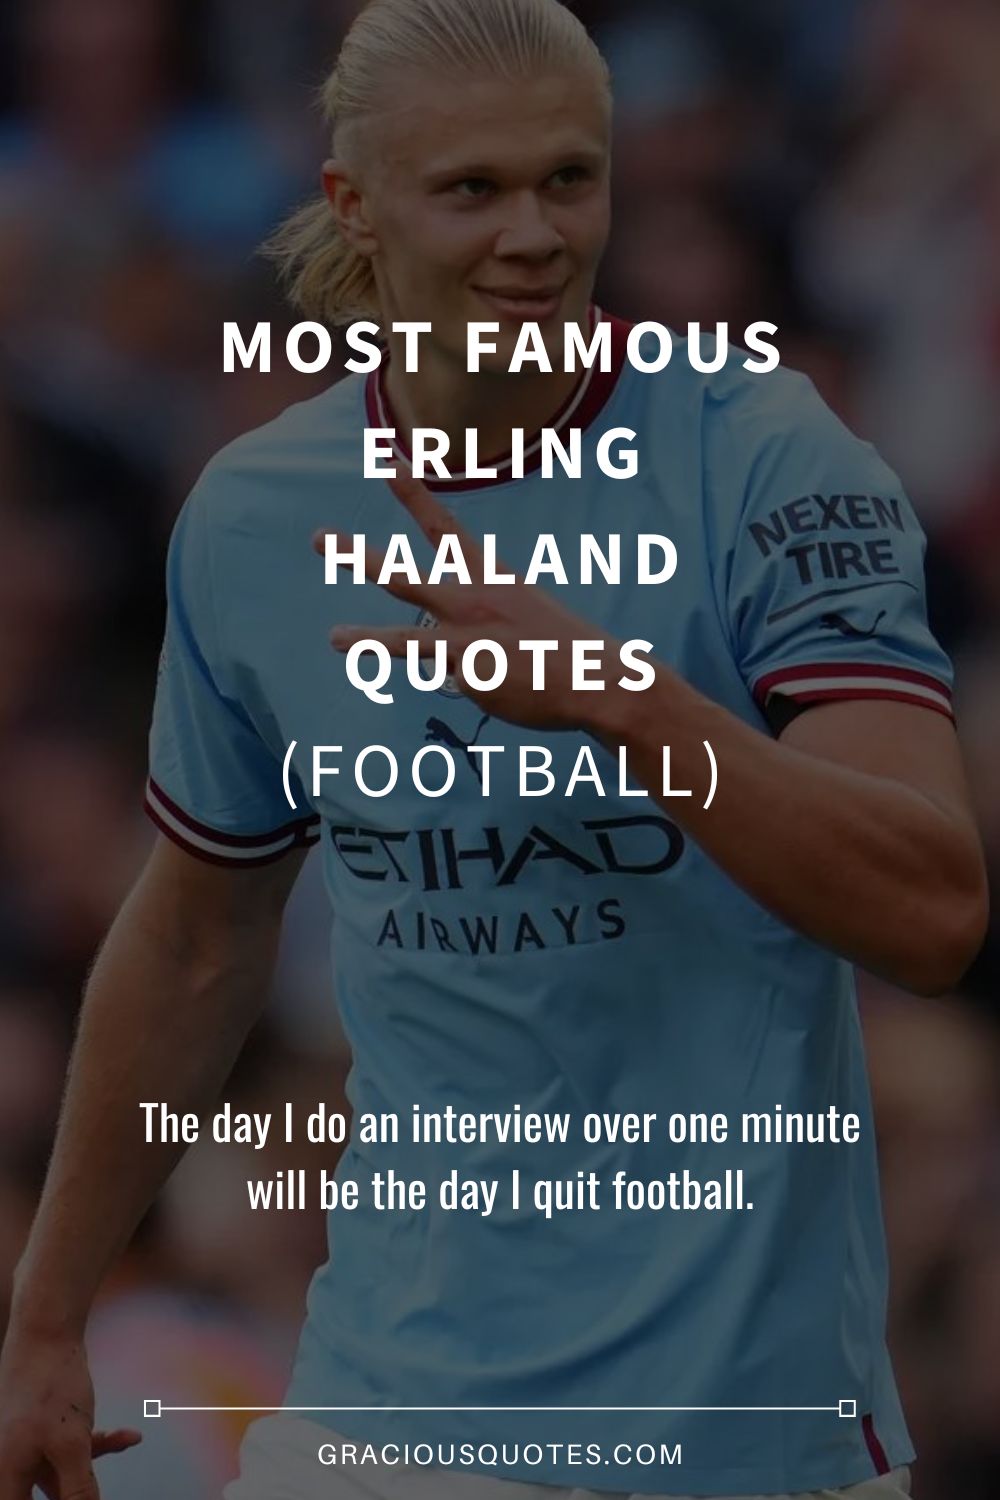 Most Famous Erling Haaland Quotes (FOOTBALL) - Gracious Quotes